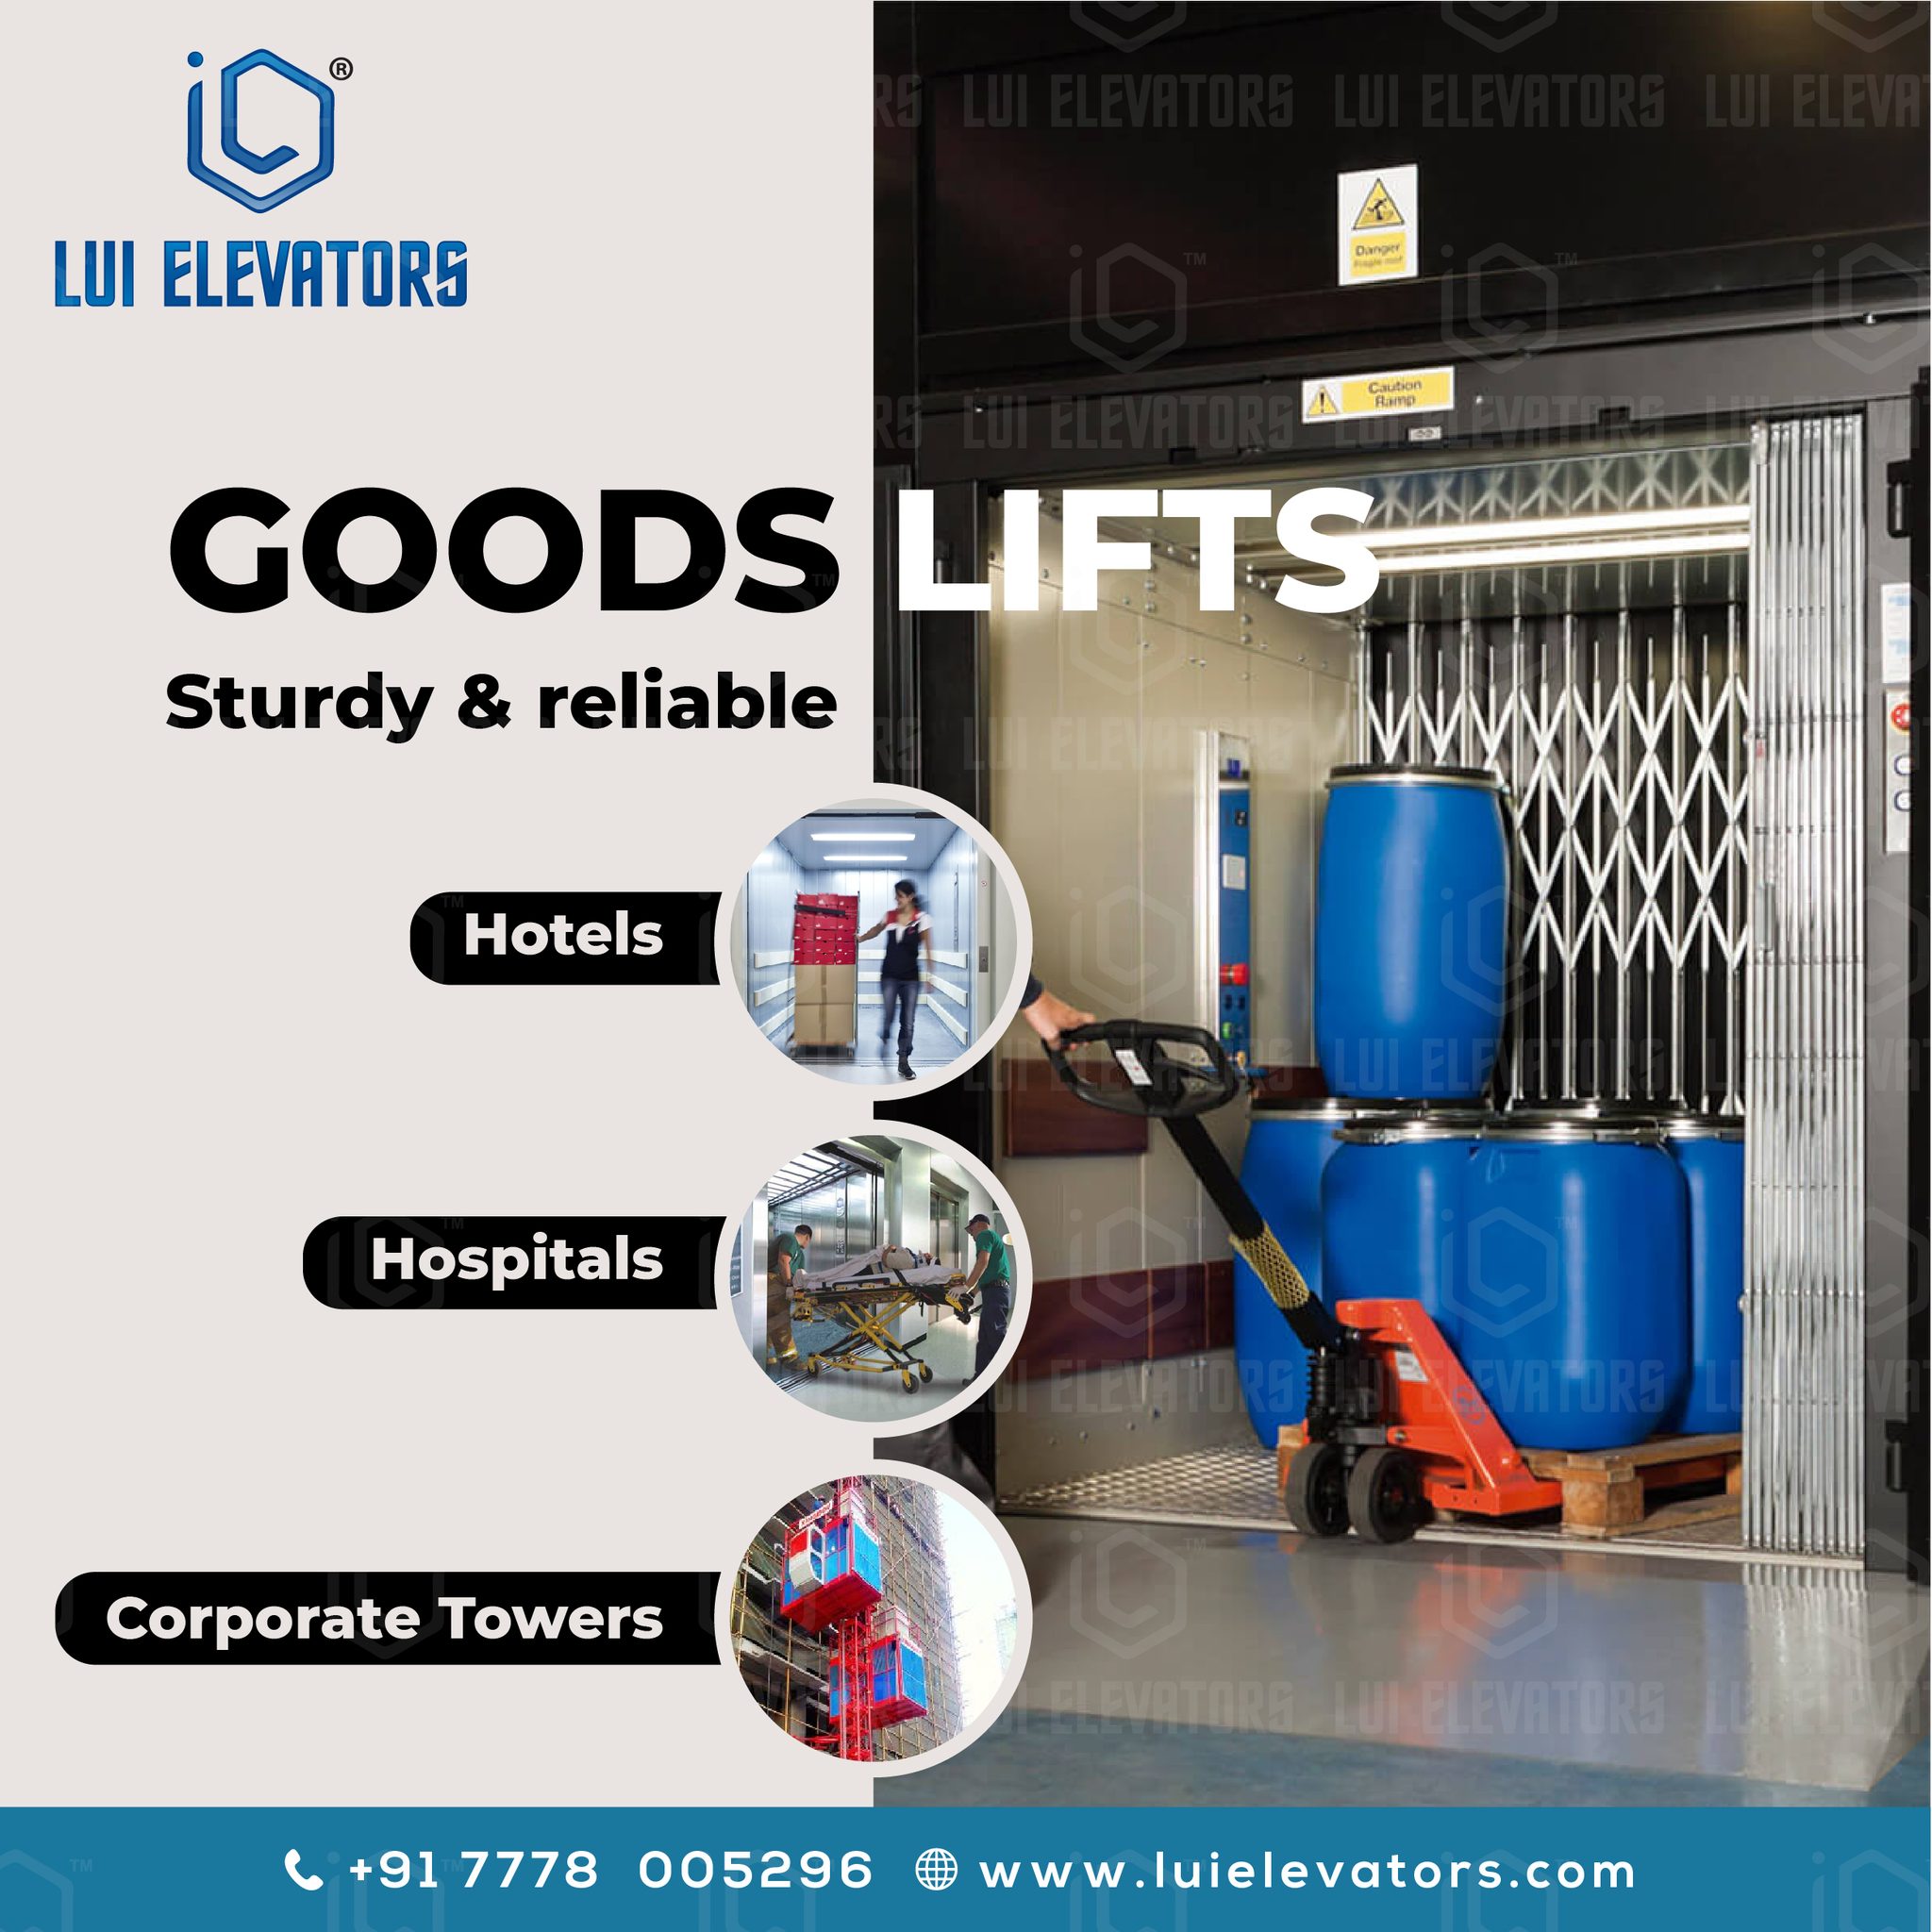 Goods lift: Types of goods lift and their benefits